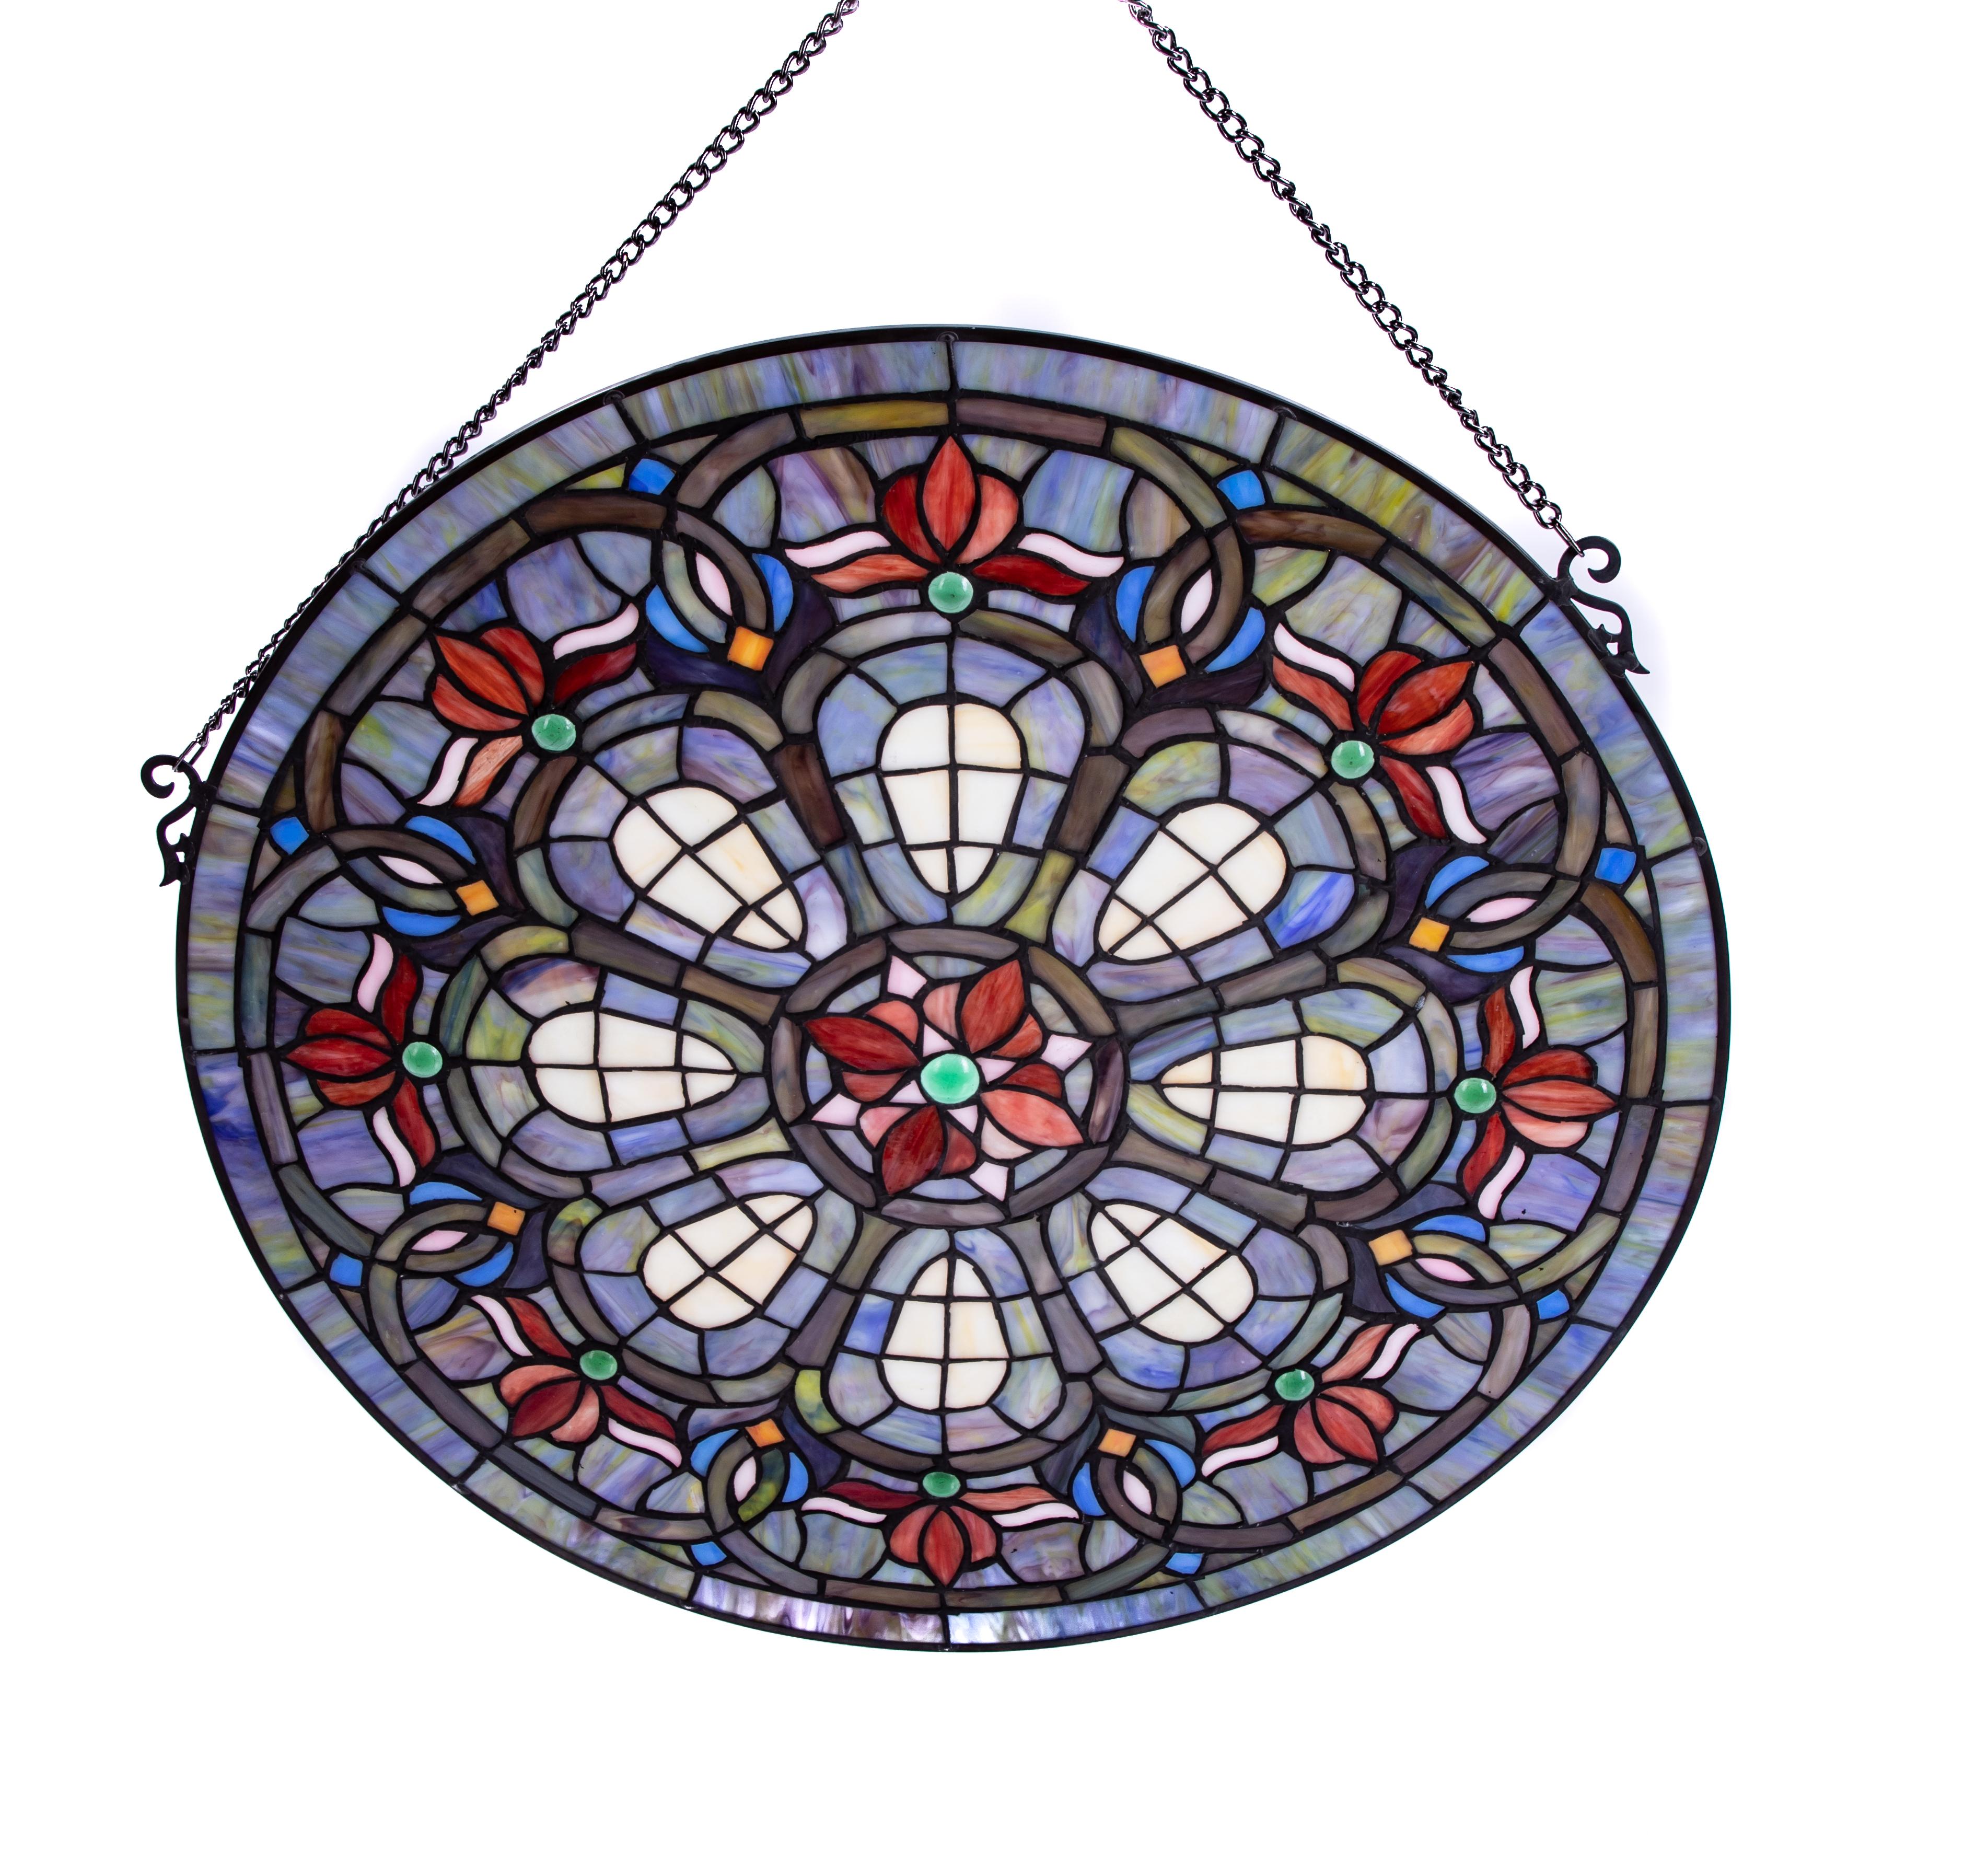 Offering this stunning stained glass panel on chain. Round in shape with various colors and pattern. The majority of the piece is in blues. Also has many shades of green, red, and white. Having a floral and geometric feel this piece will not